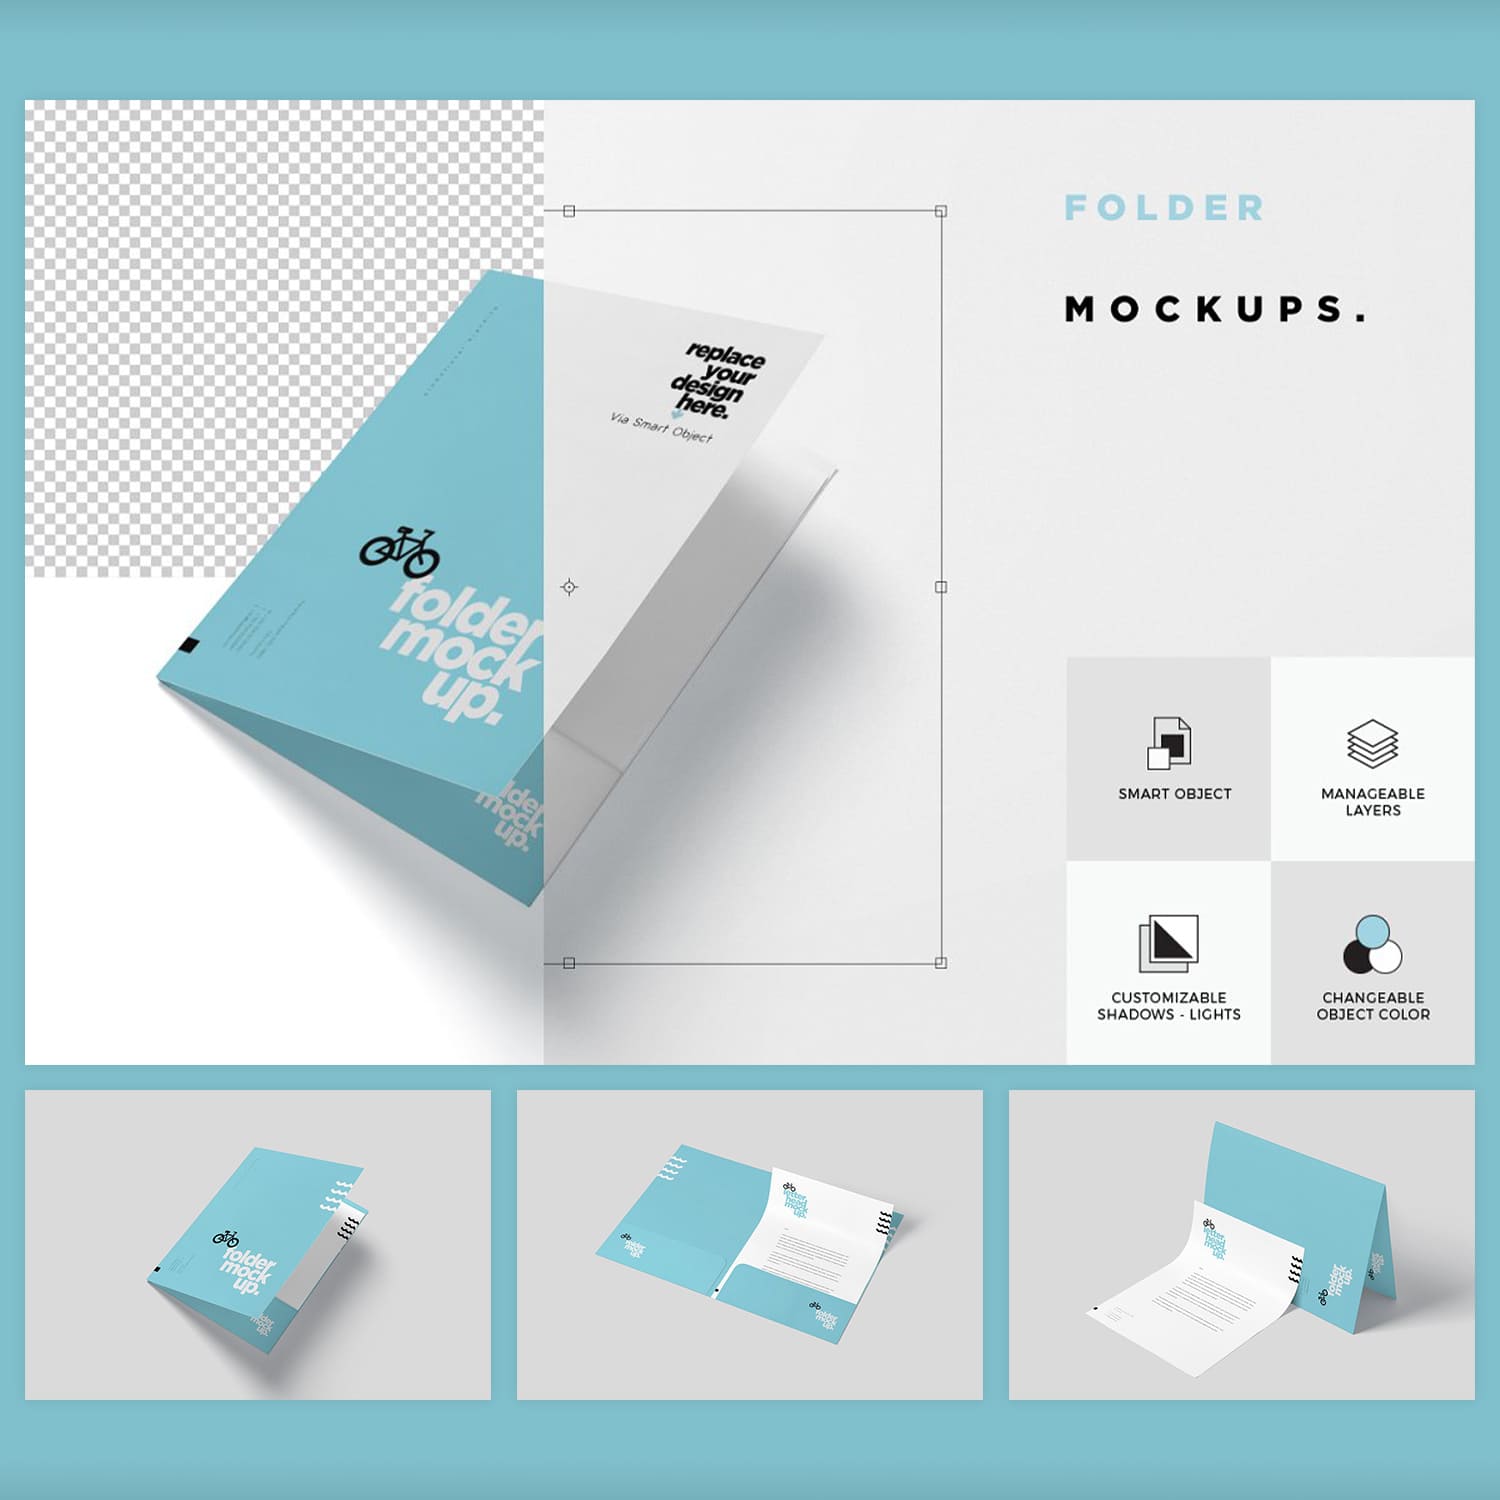 A pack of images of paper folders with great designs.